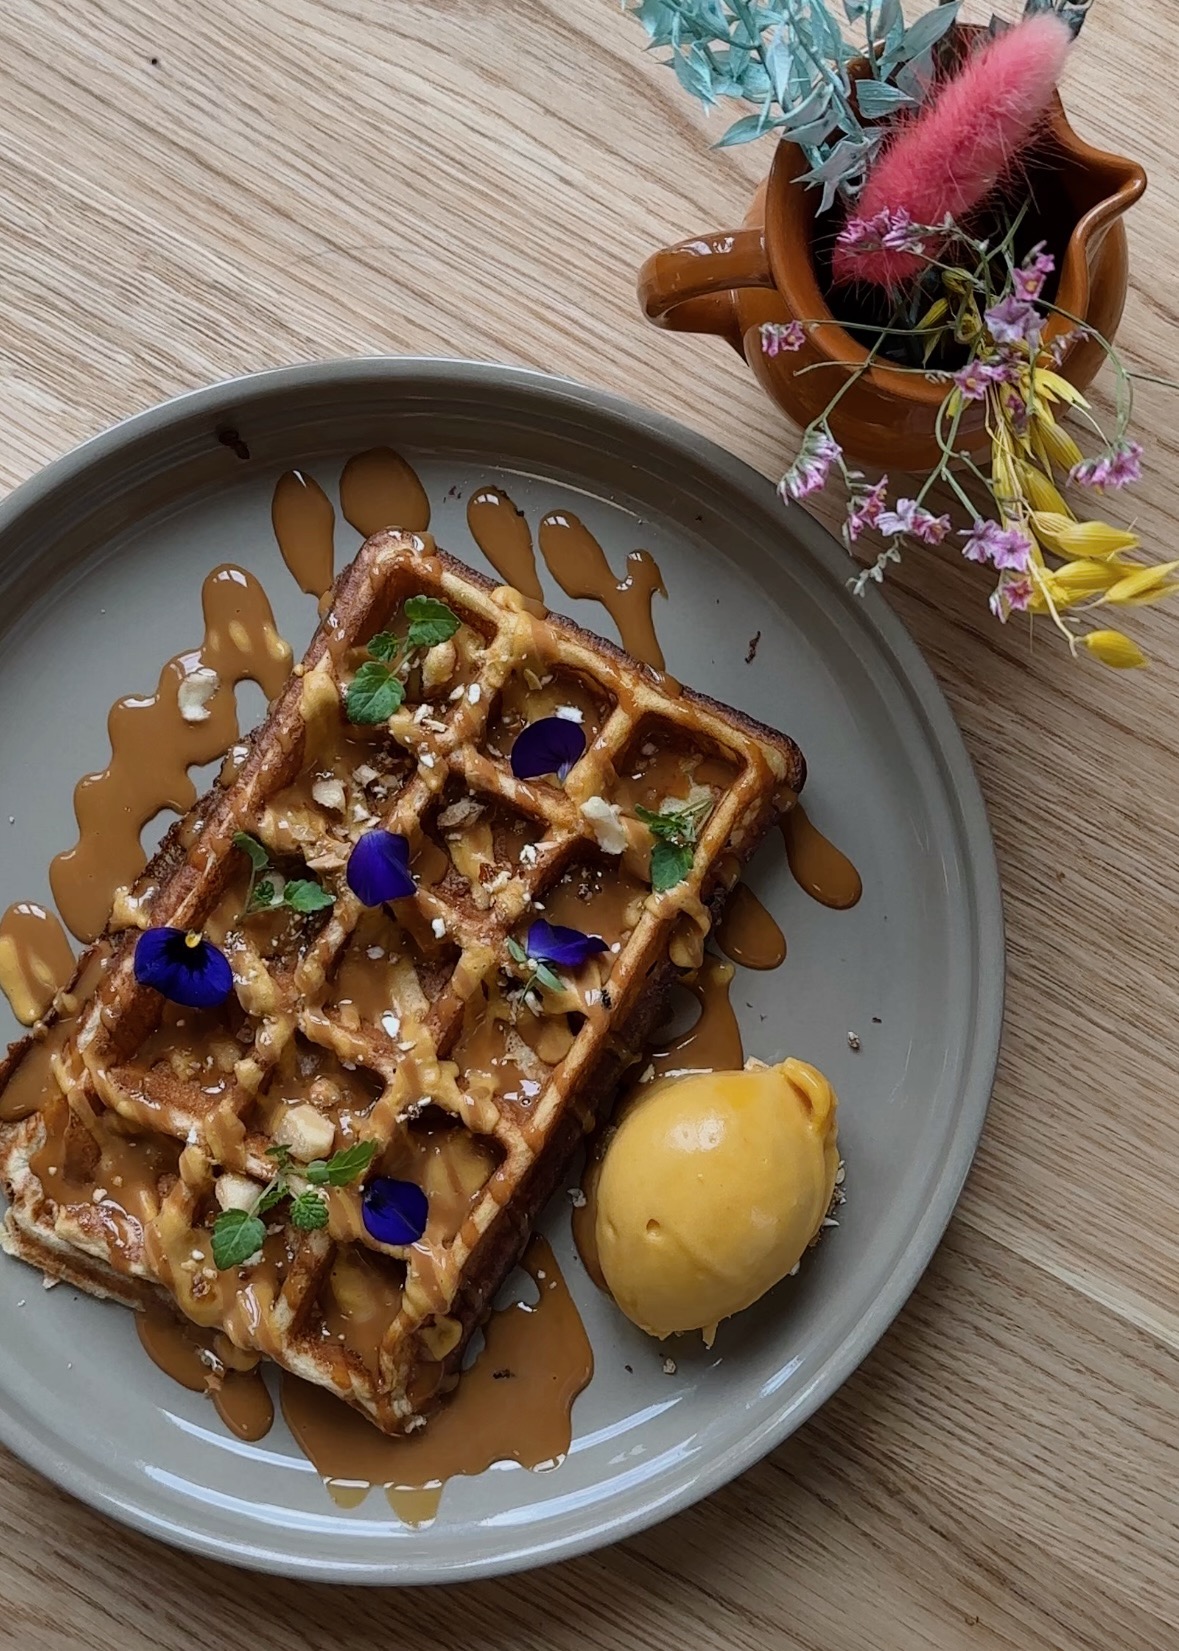 A must dish on Zurich breakfast and brunch scene  - quinoa waffle with lacuna ice cream // Photo Credit @idaheritier